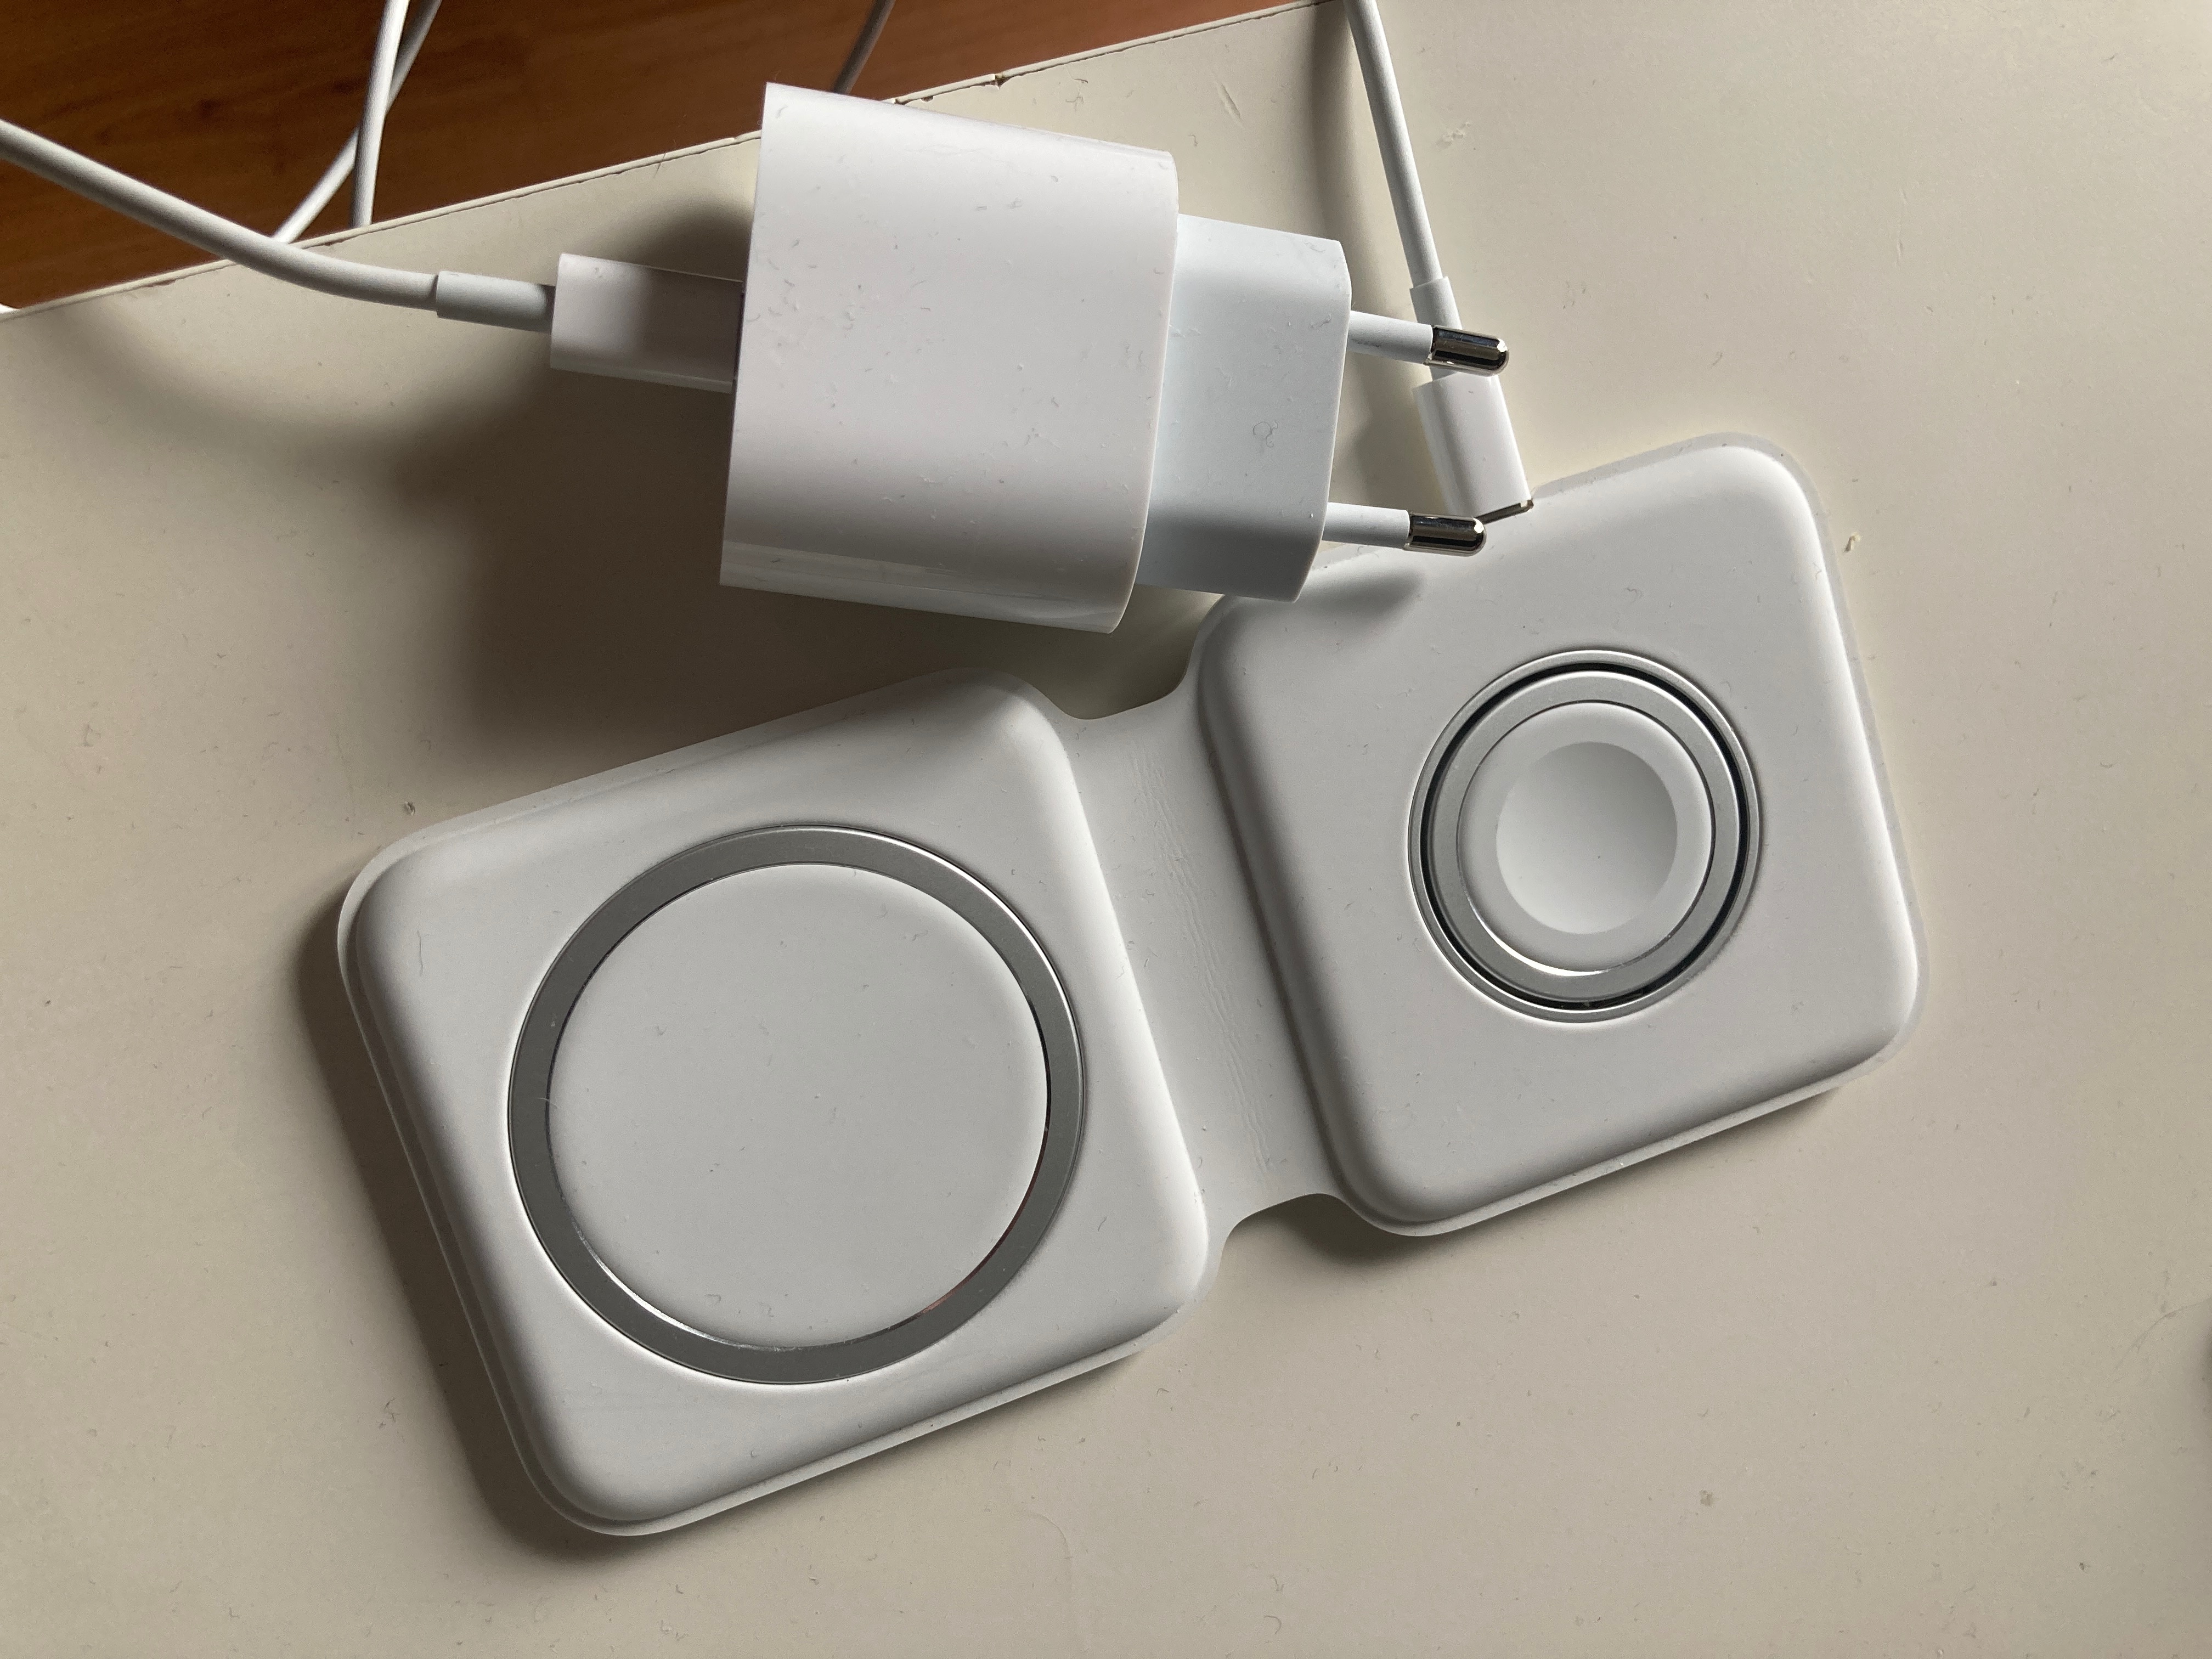 Apple's MagSafe Duo Charger Doesn't Support Full 15W Charging for